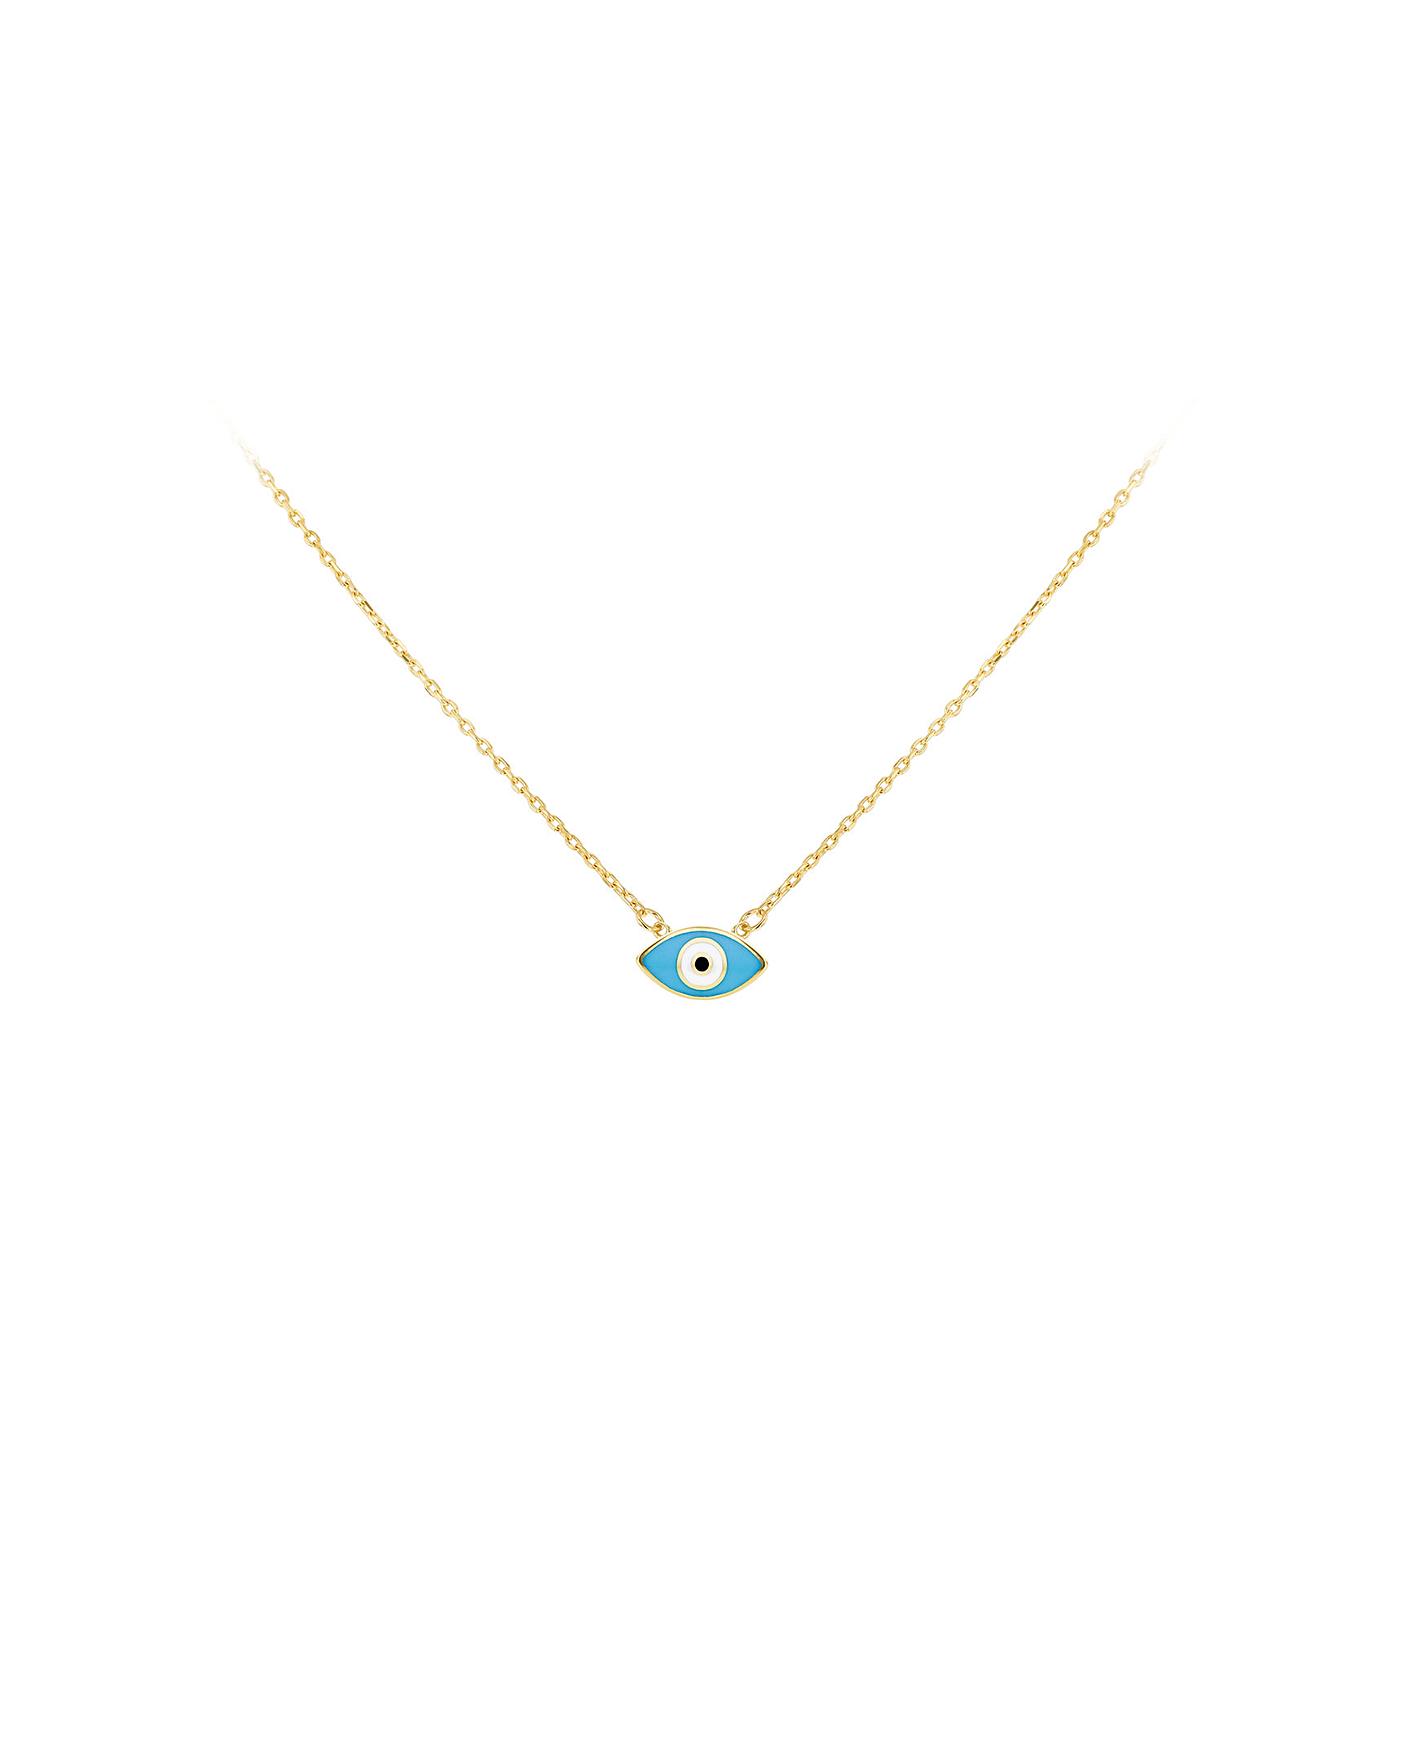 9ct Yellow Gold 10mm X 6mm Evil Eye Necklace 41-43cm/16-17